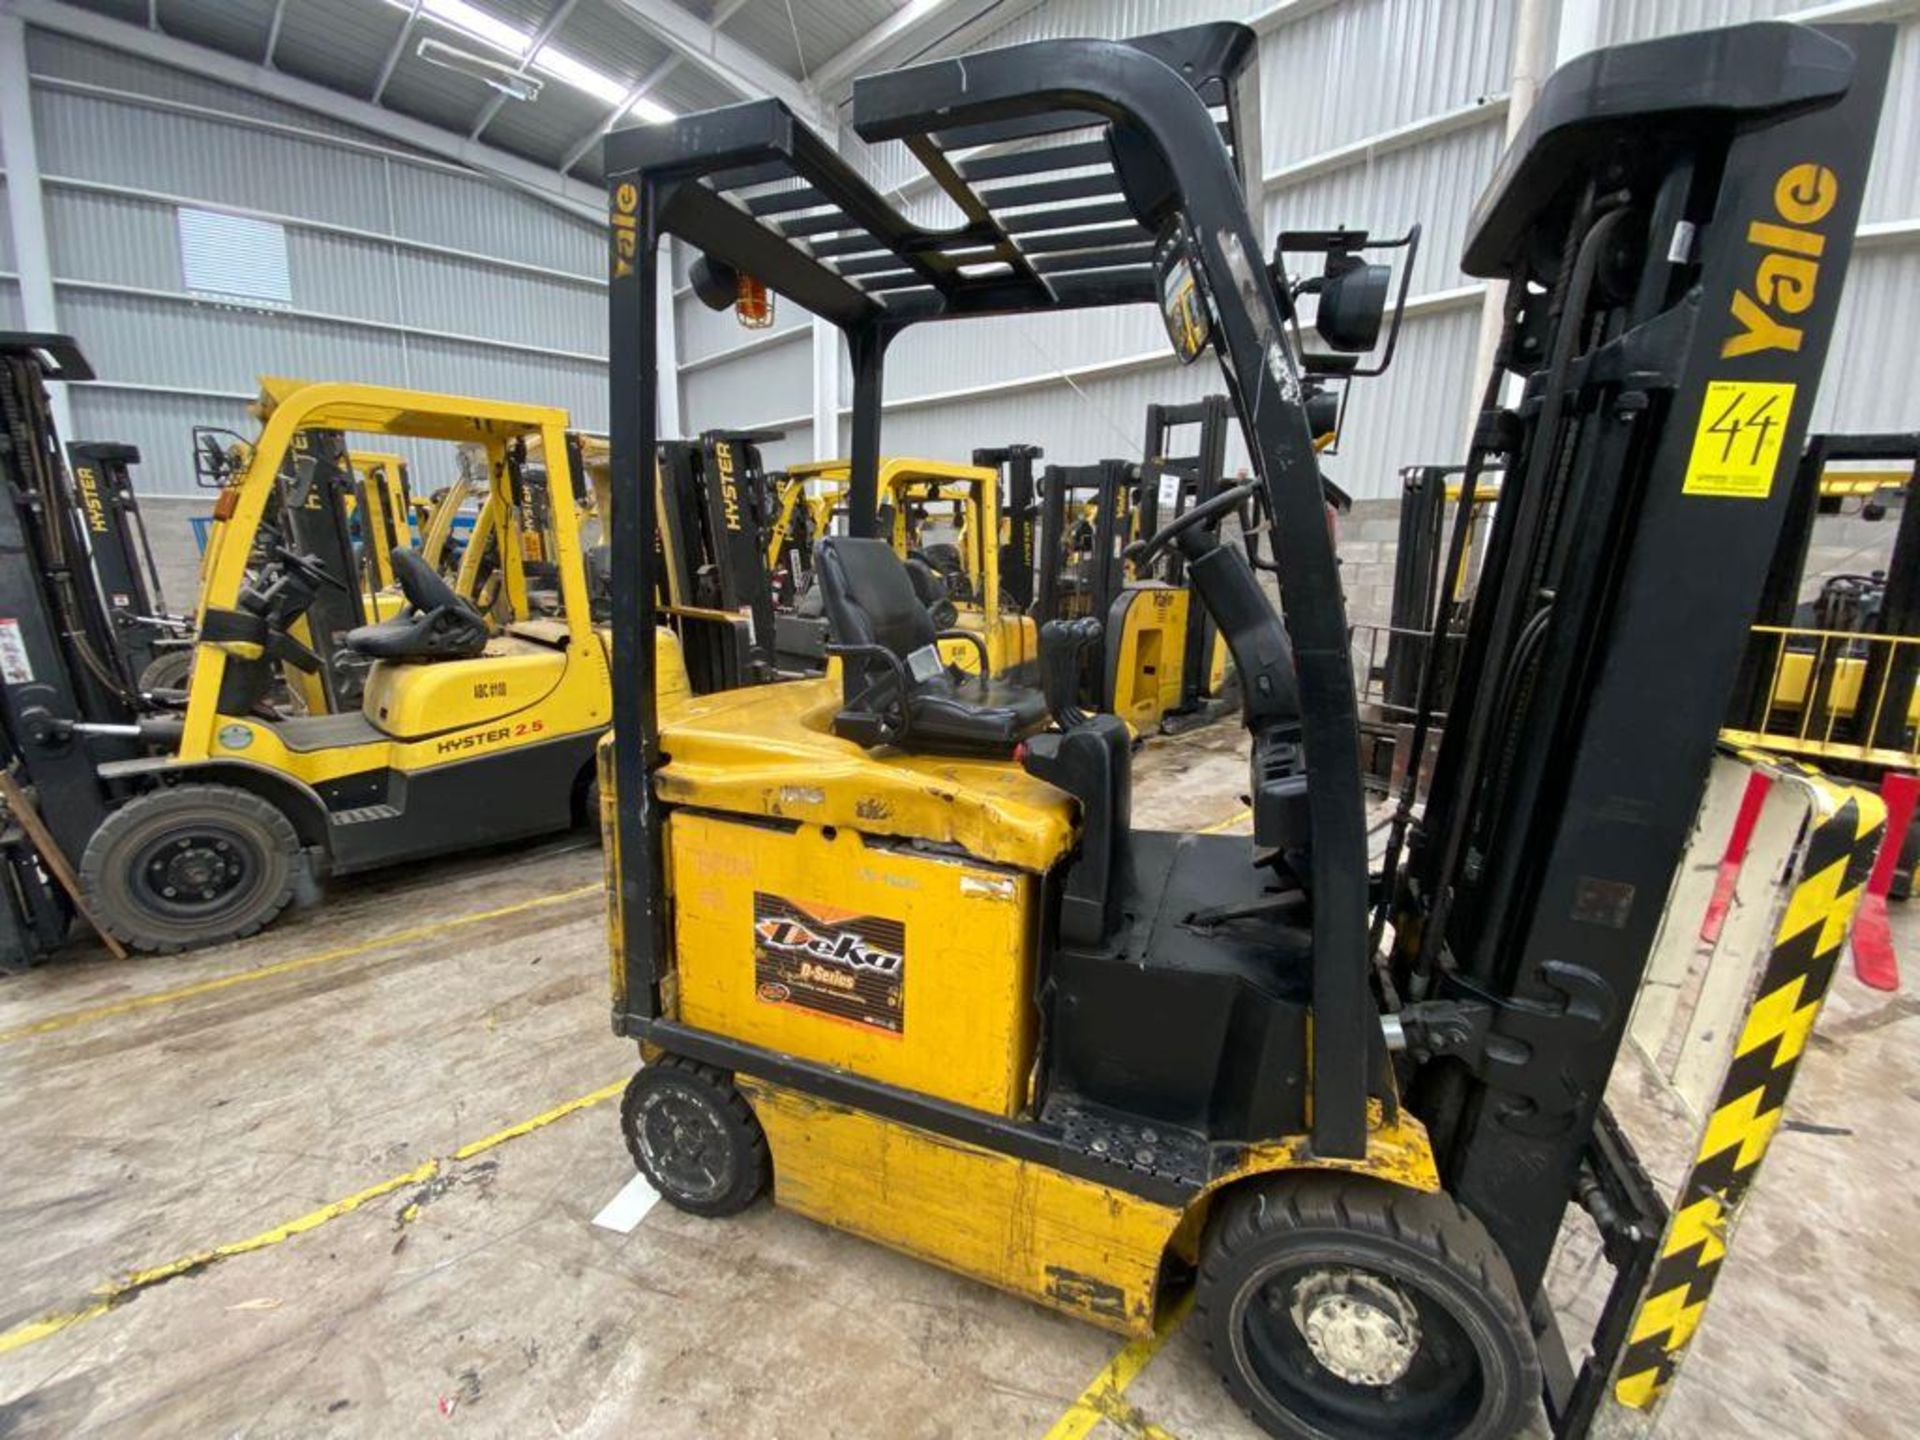 Yale Electric Forklift, Model ERC060VGN36TE088, S/N A968N17882R, Year 2017, 5800 lb capacity - Image 14 of 44